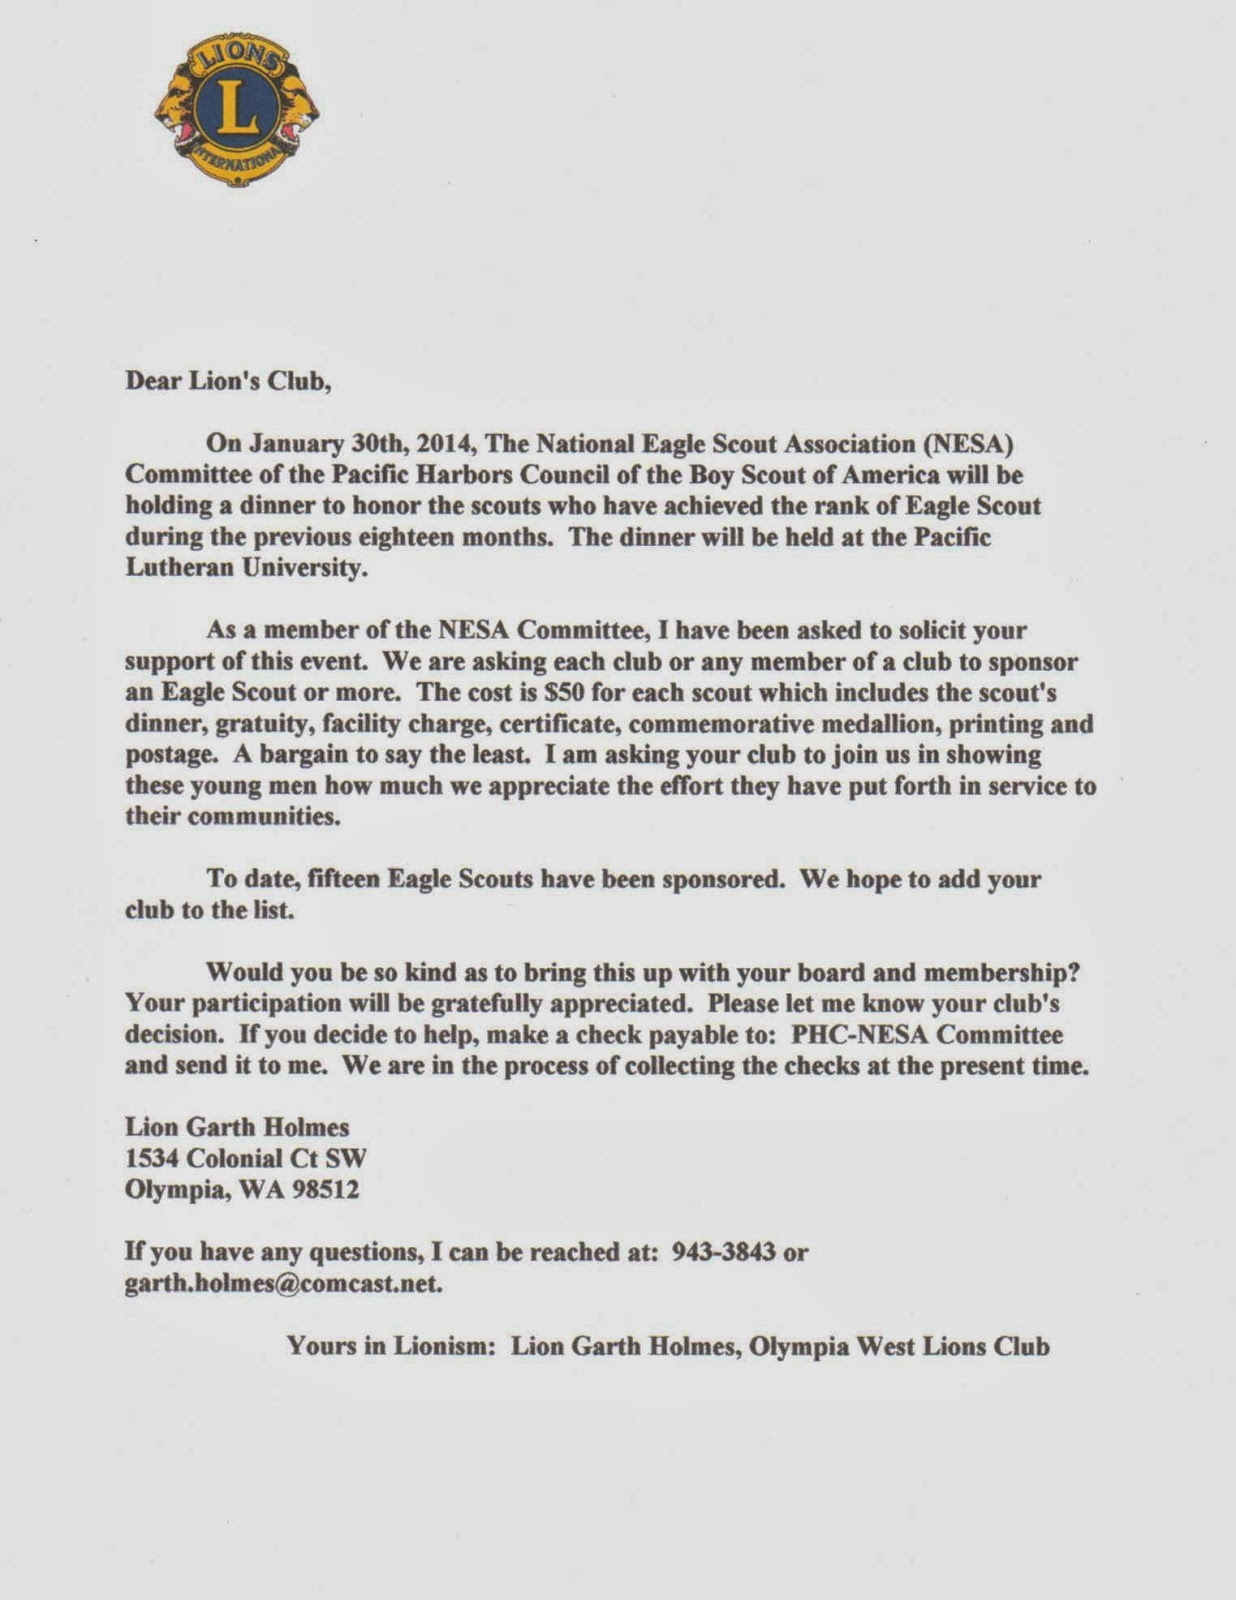 Eagle Scout Donation Letter Template - Eagle Scout Thank You Letter Gallery Letter format formal Sample